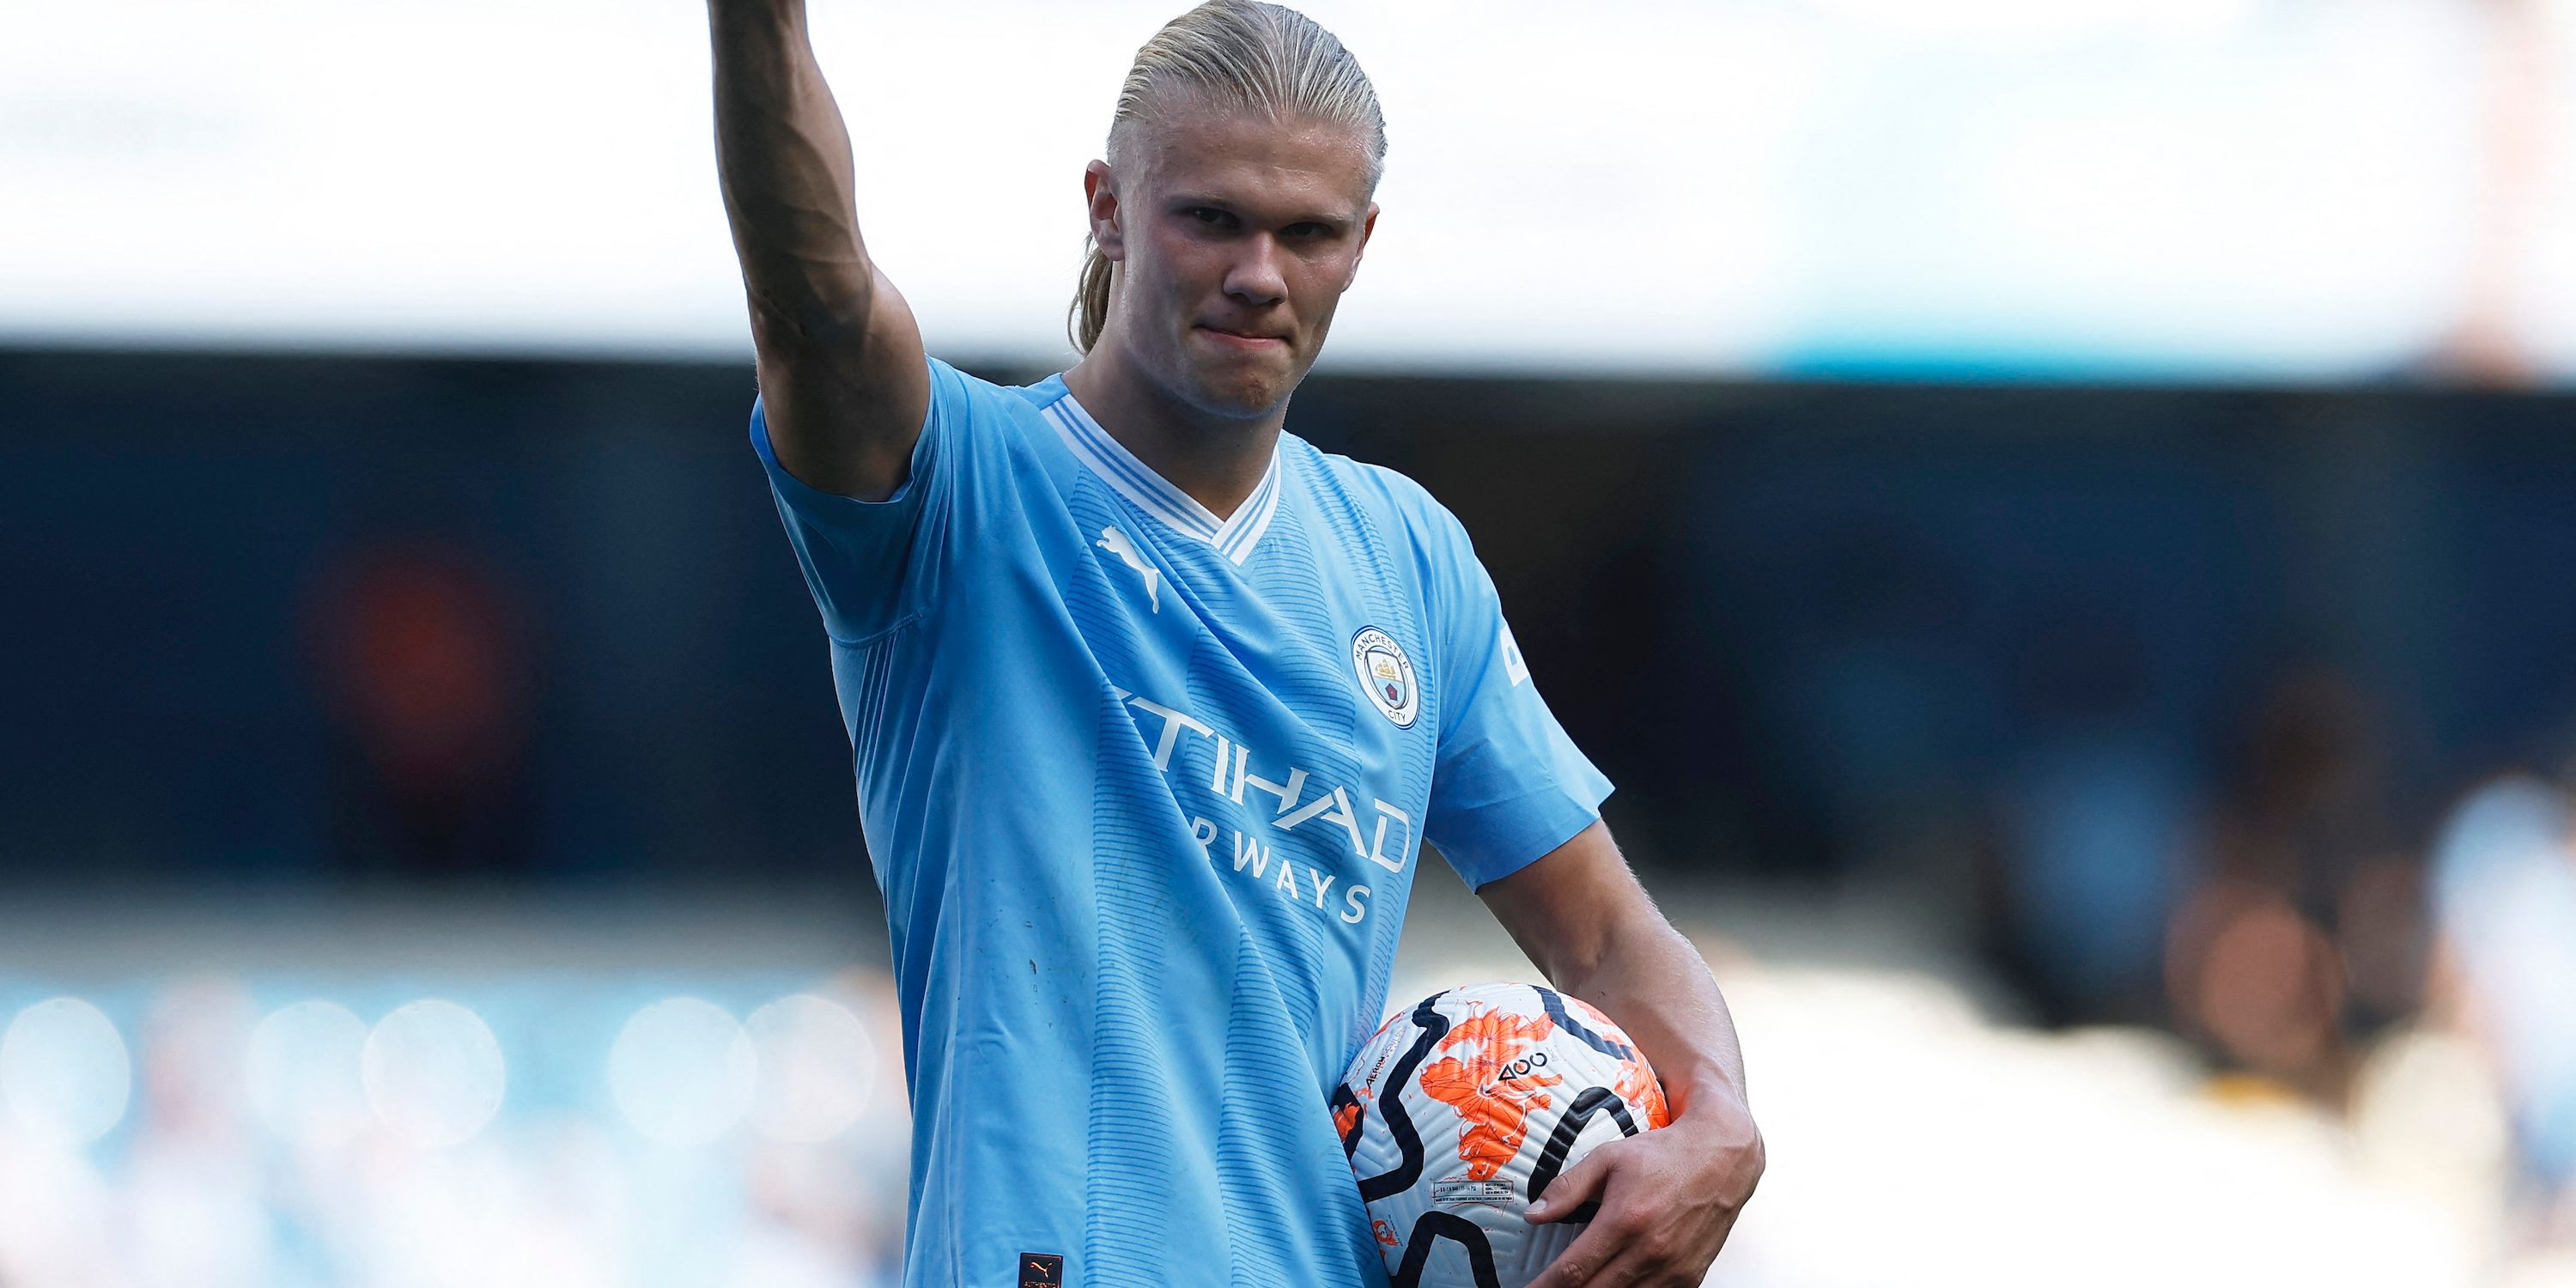 Manchester City's Erling Braut Haaland celebrates with the match ball after the match